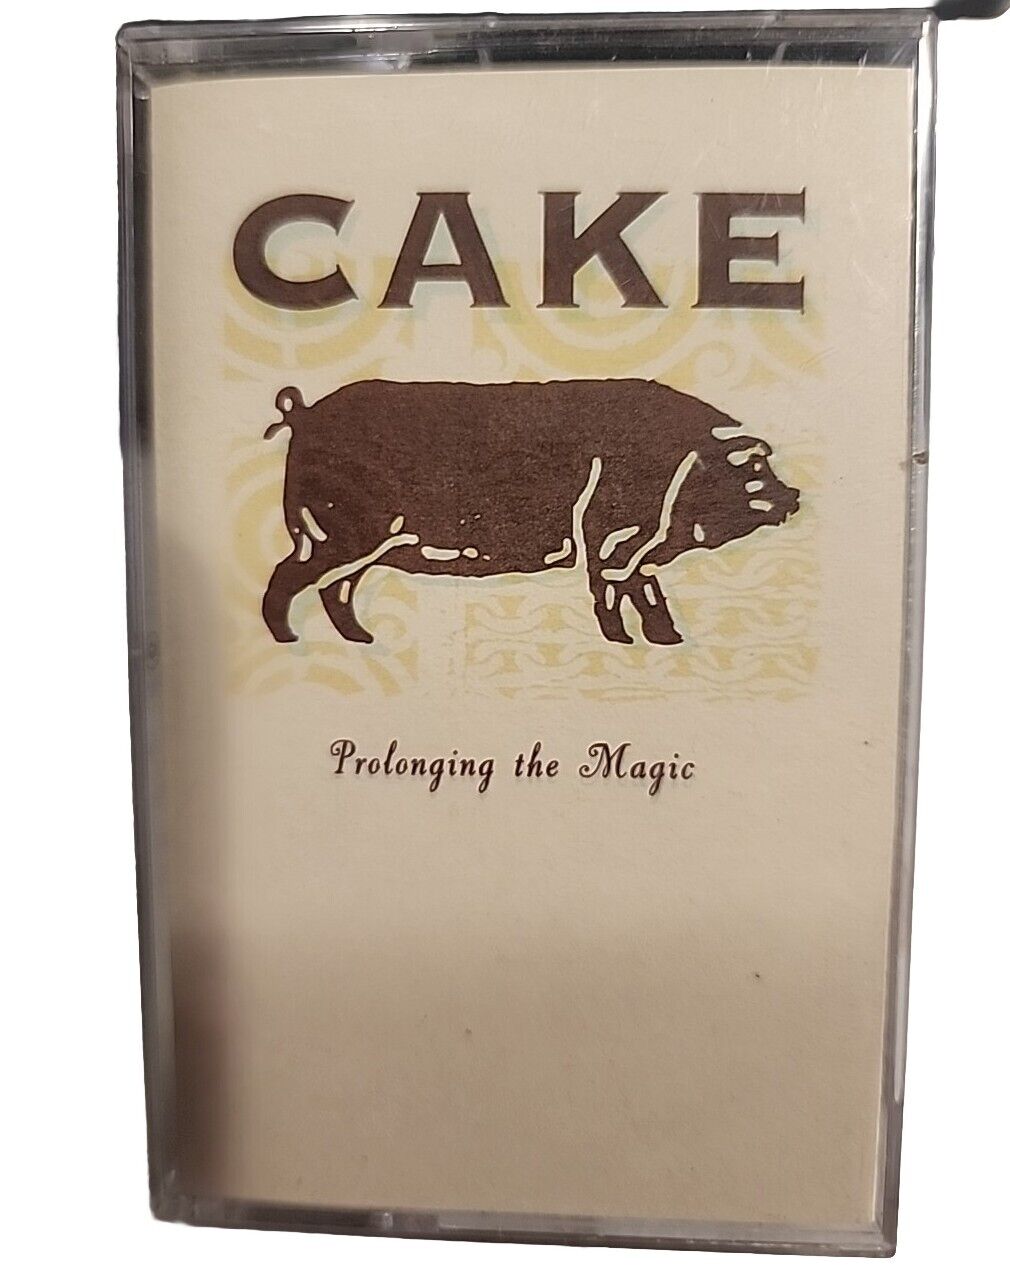 Cake- Prolonging the Magic- 1998 Cassette Capricorn Records USA Indie Rock